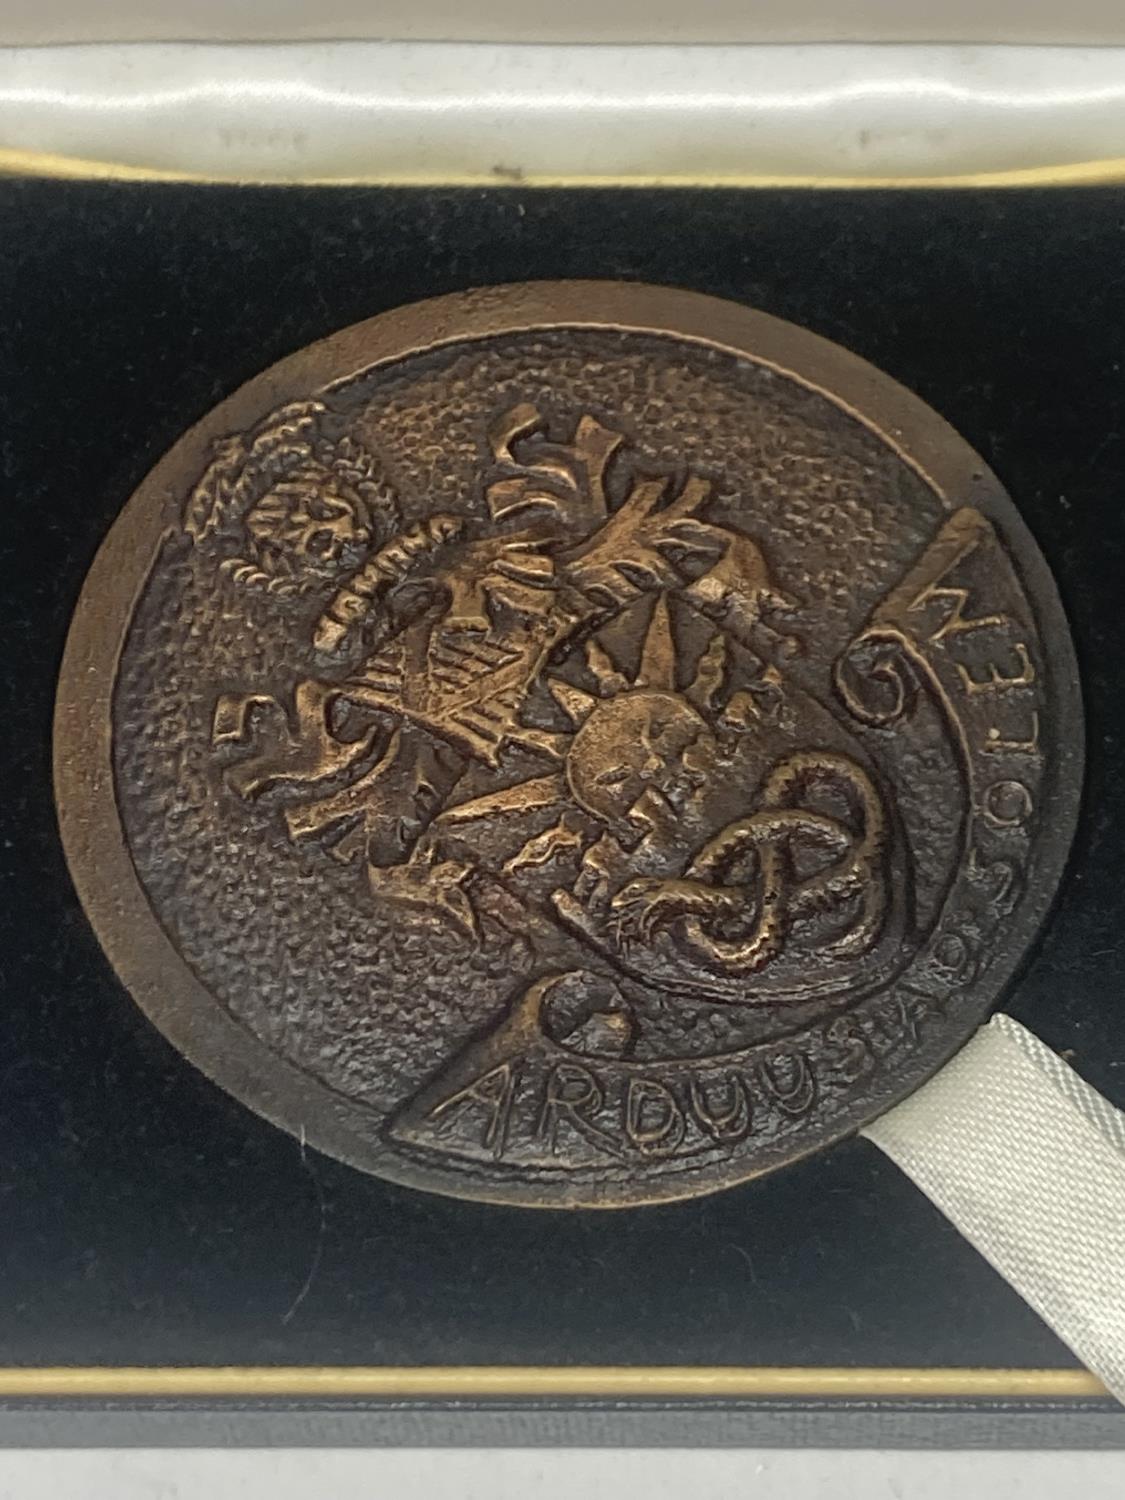 A LARGE BRONZE MEDAL VICTORIA UNIVERSITY OF MANCHESTER 1851 -2001 IN A PRESENTATION BOX